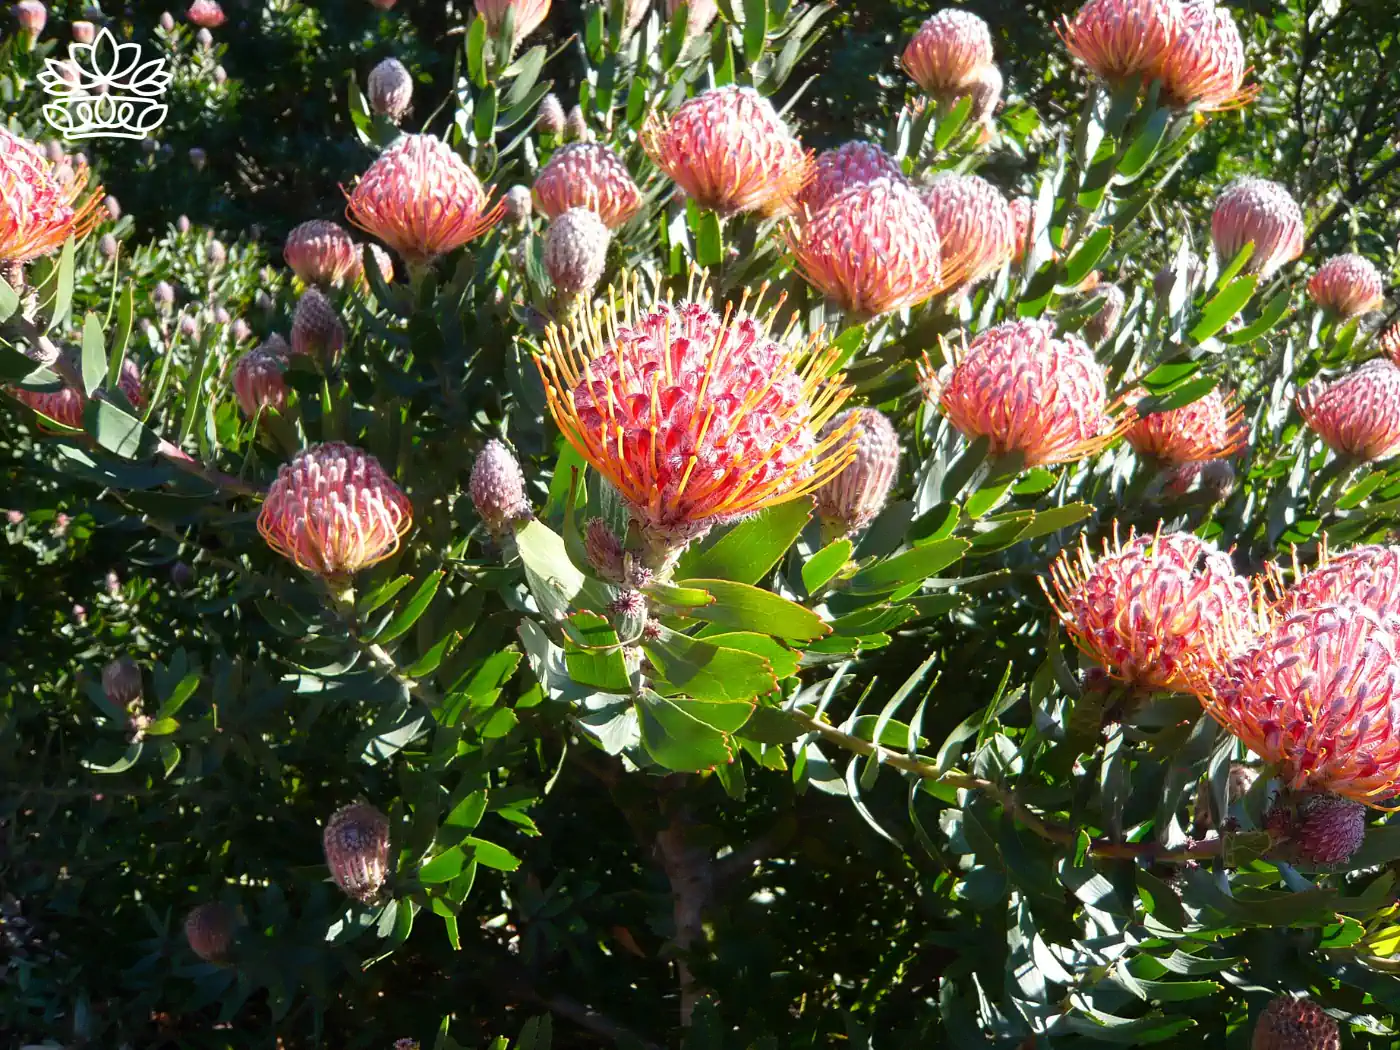 Cluster of red Protea flowers with green leaves - Fabulous Flowers and Gifts, Proteas Collection